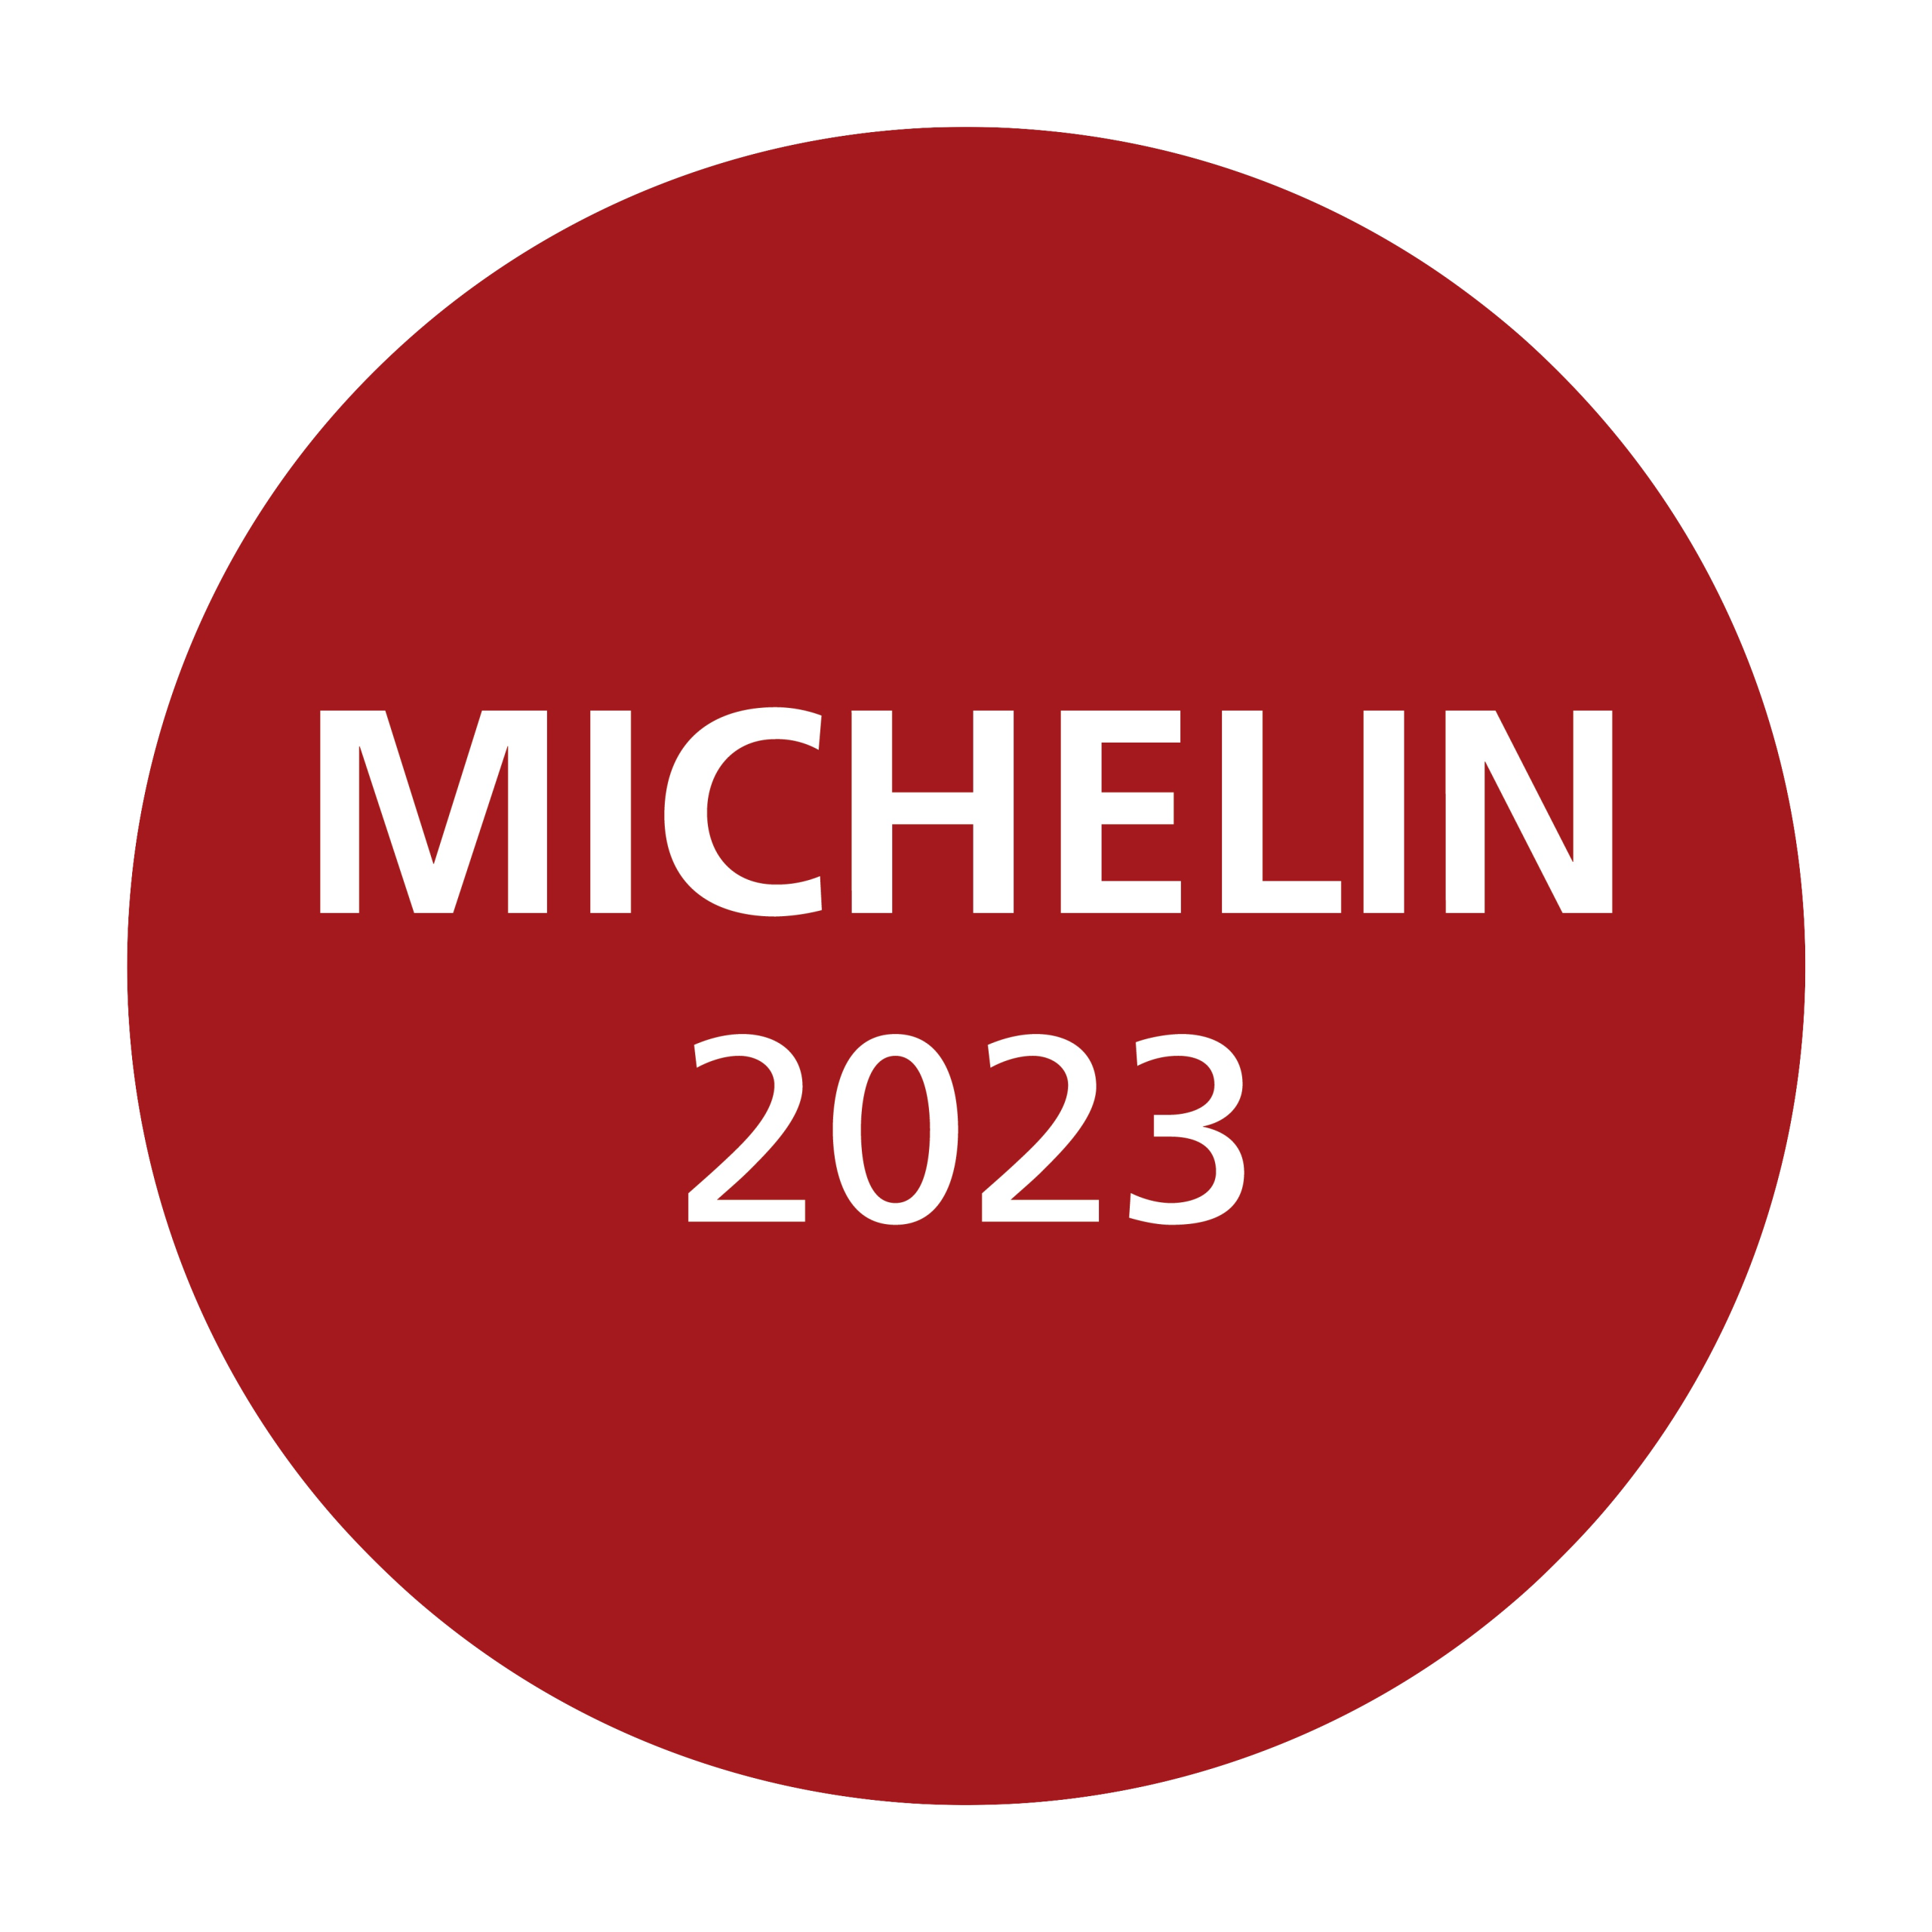 Listed in the Michelin Guide 2023